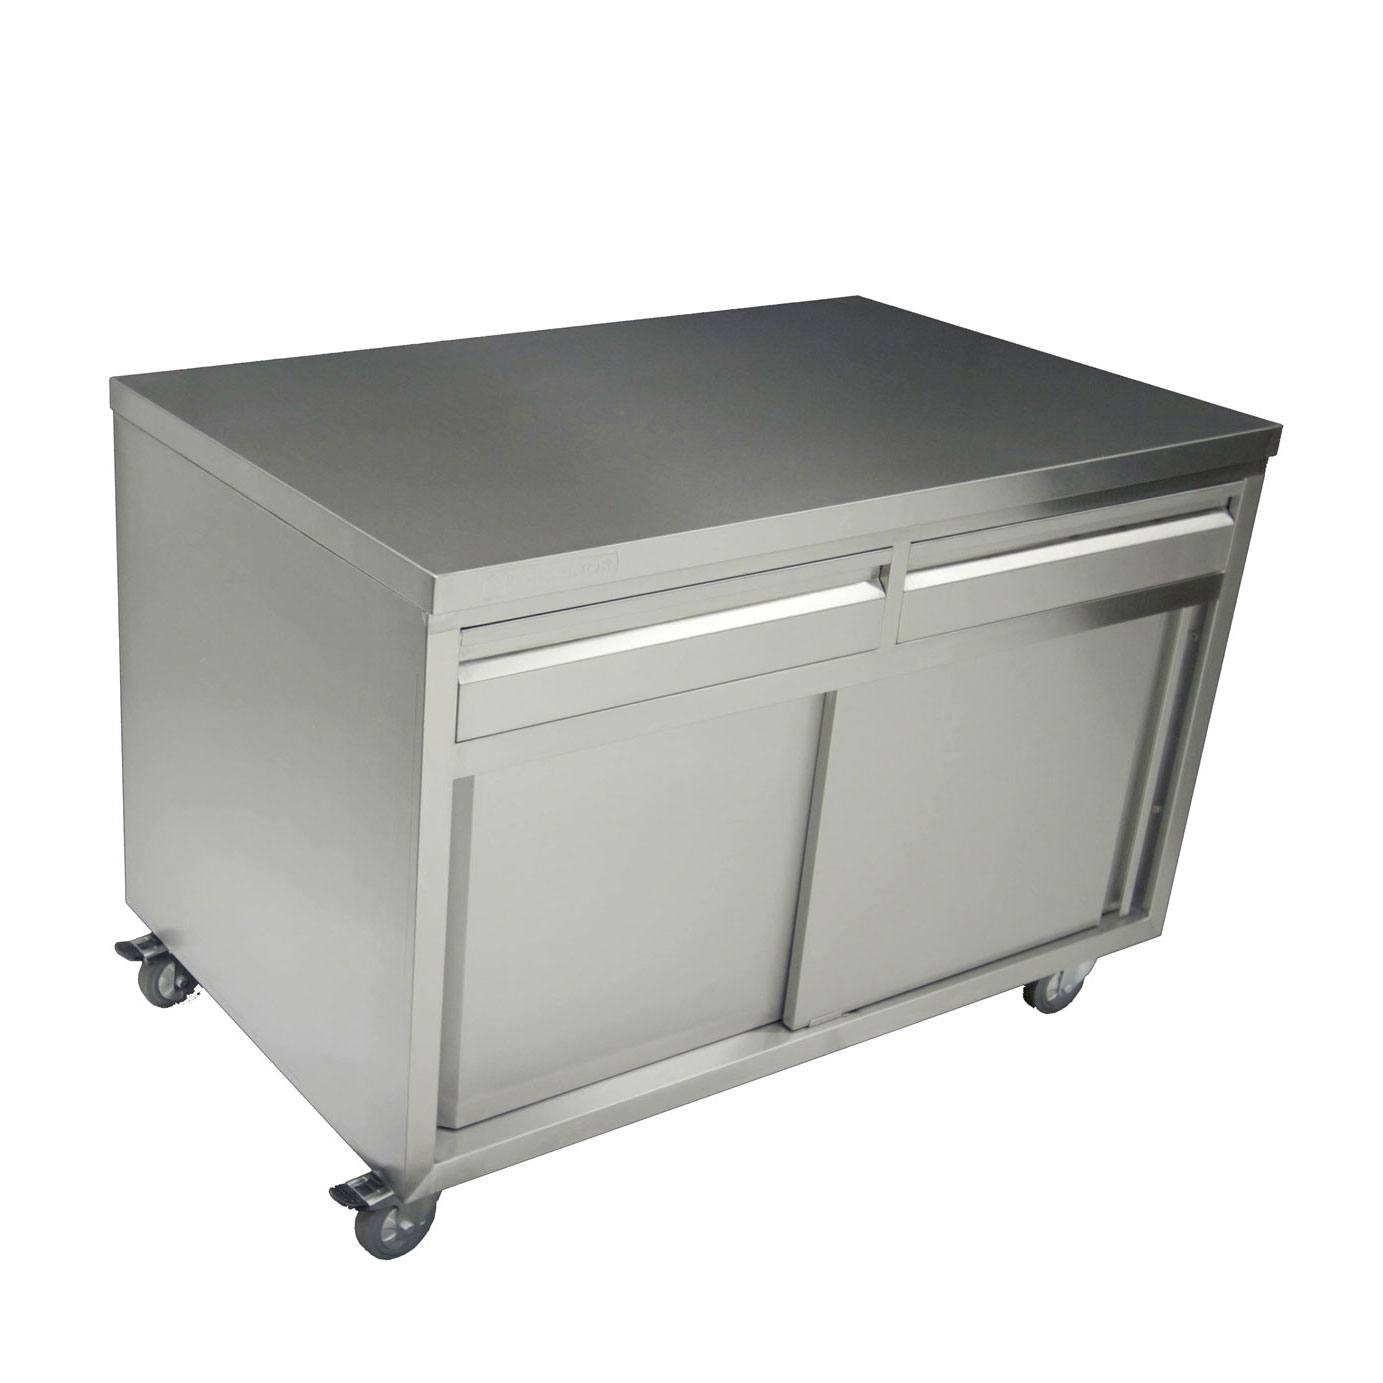 Thorinox TCAD-3060-SS Stainless Storage Cabinet, 60"W x 30"D x 34"H, with sliding doors and (2) drawers